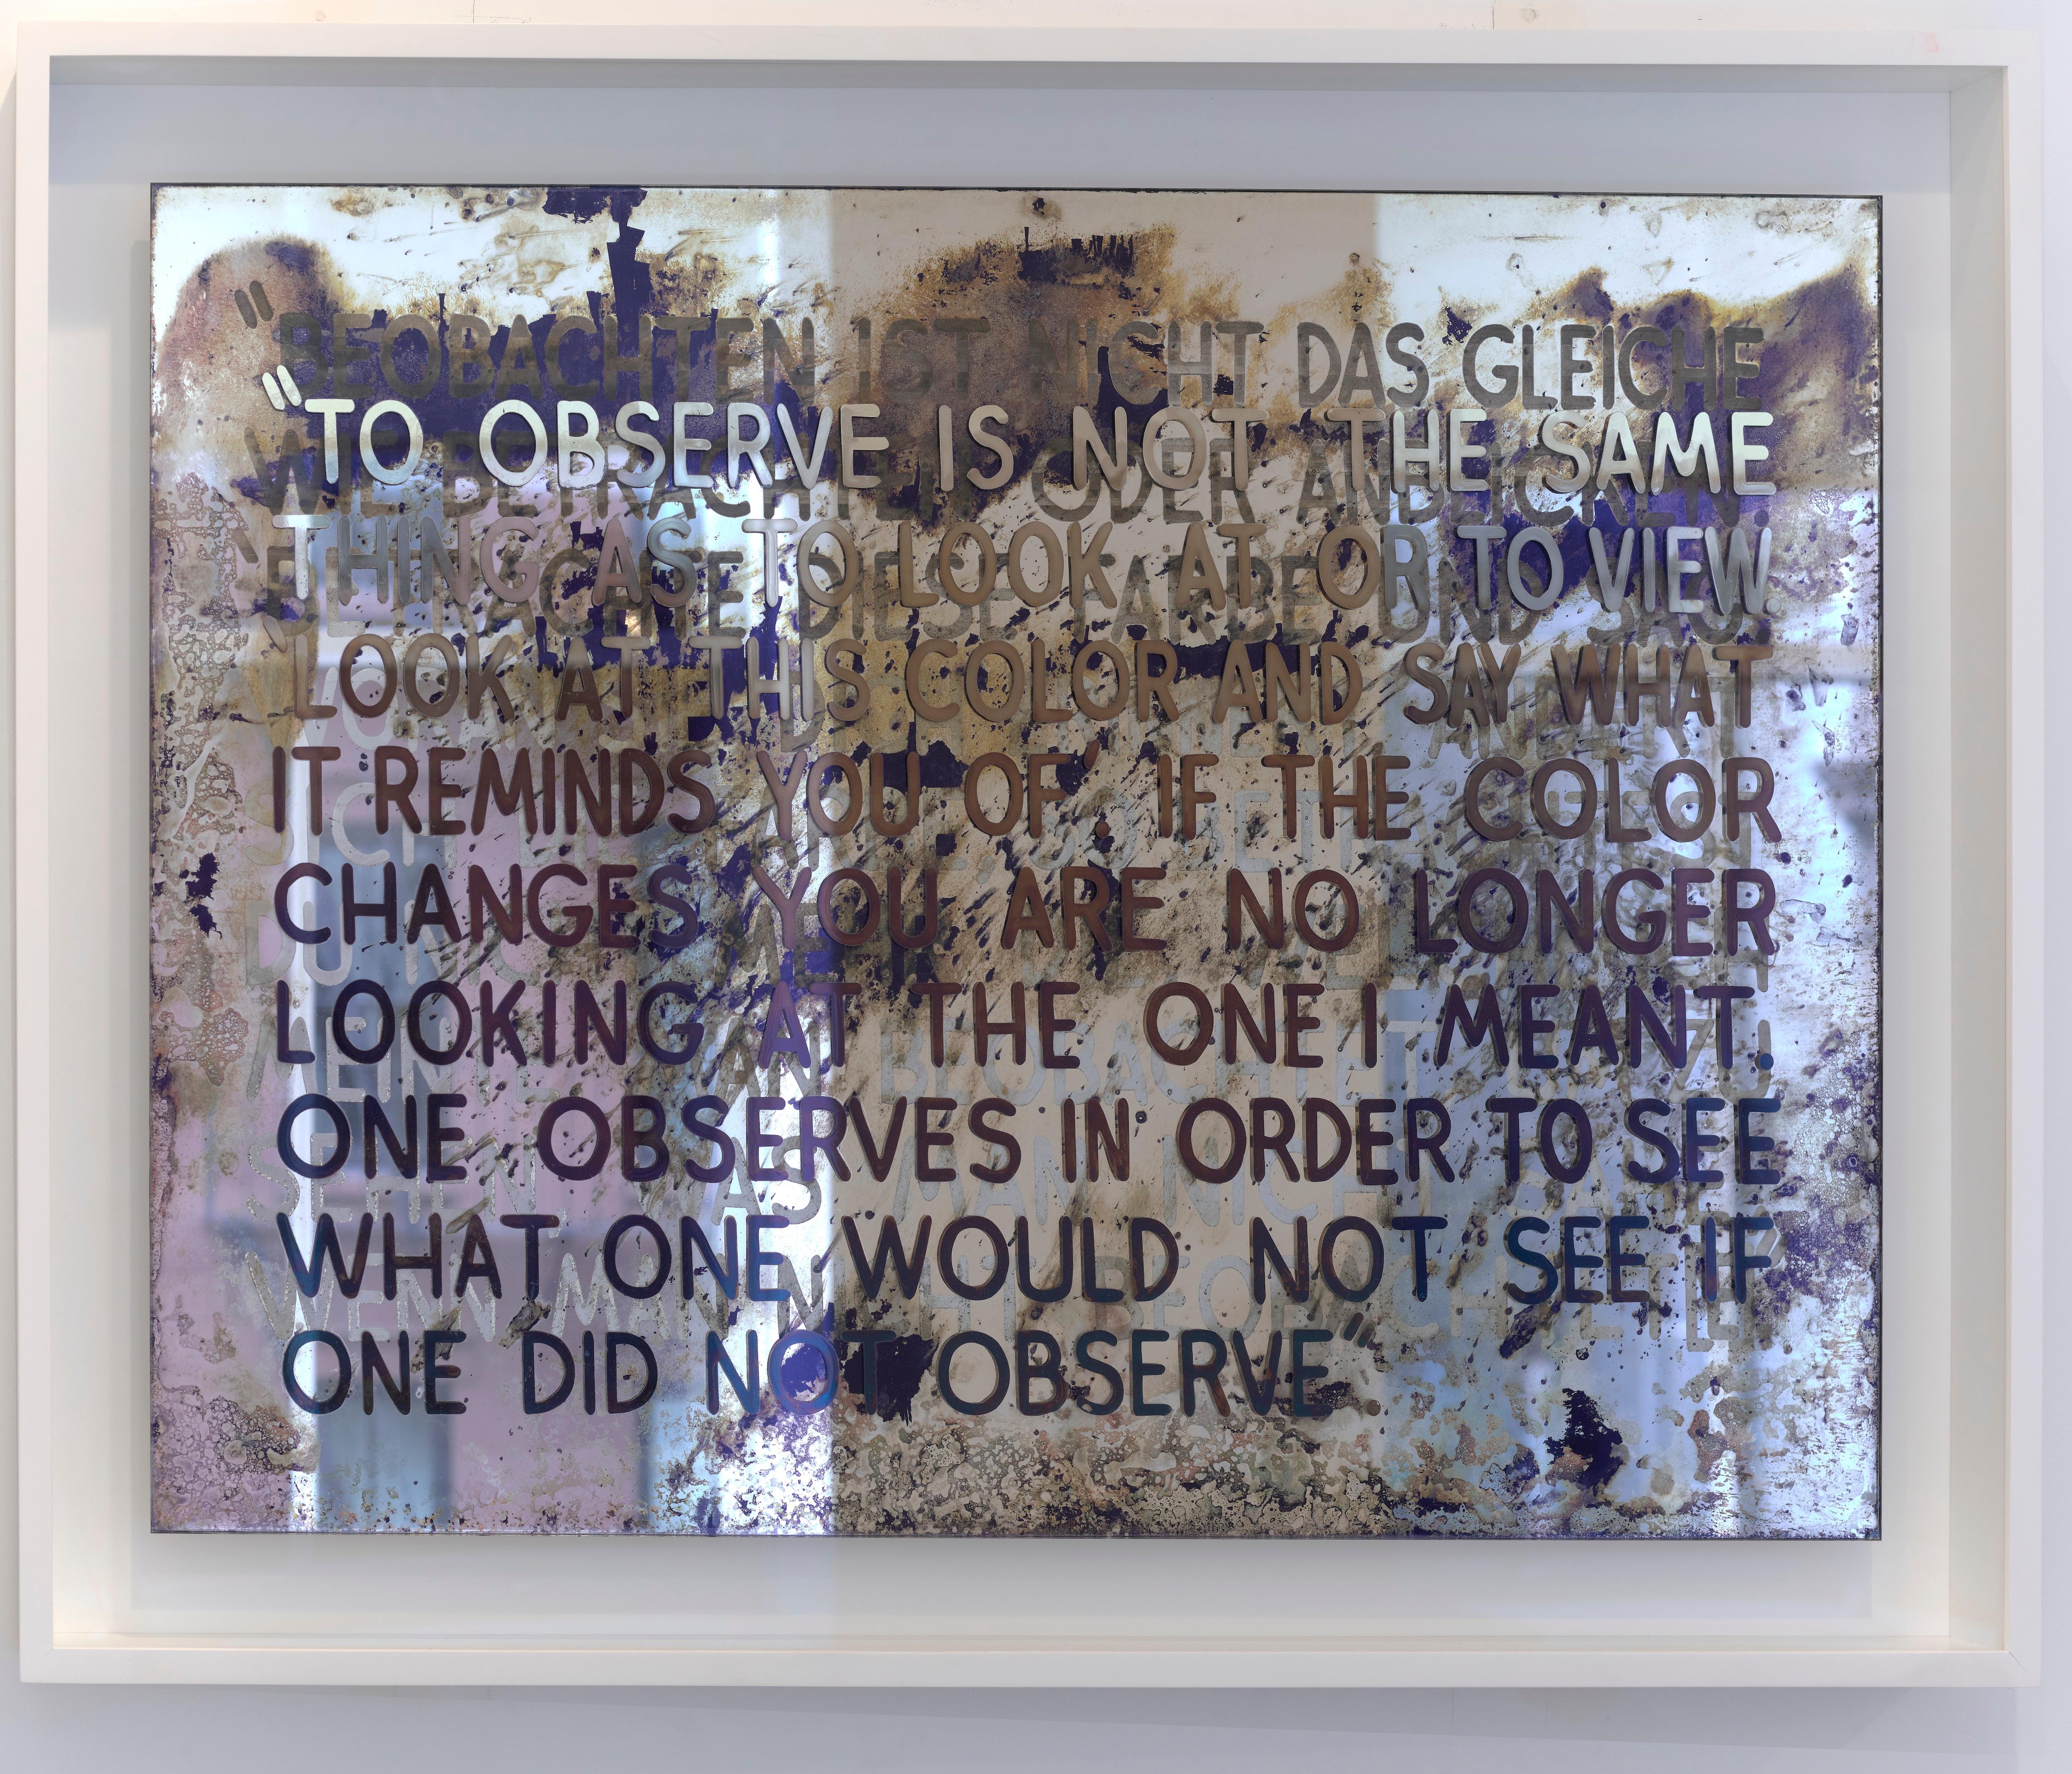 Mel Bochner
If The Colour Changes..., 2018
signed and dated on label, verso
etched and silvered glass
76.8 x 102.2 x 8.3 cm
30 1/4 x 40 1/4 x 3 1/4 in
edition of 12 (+ 2 APs, 1 PP)